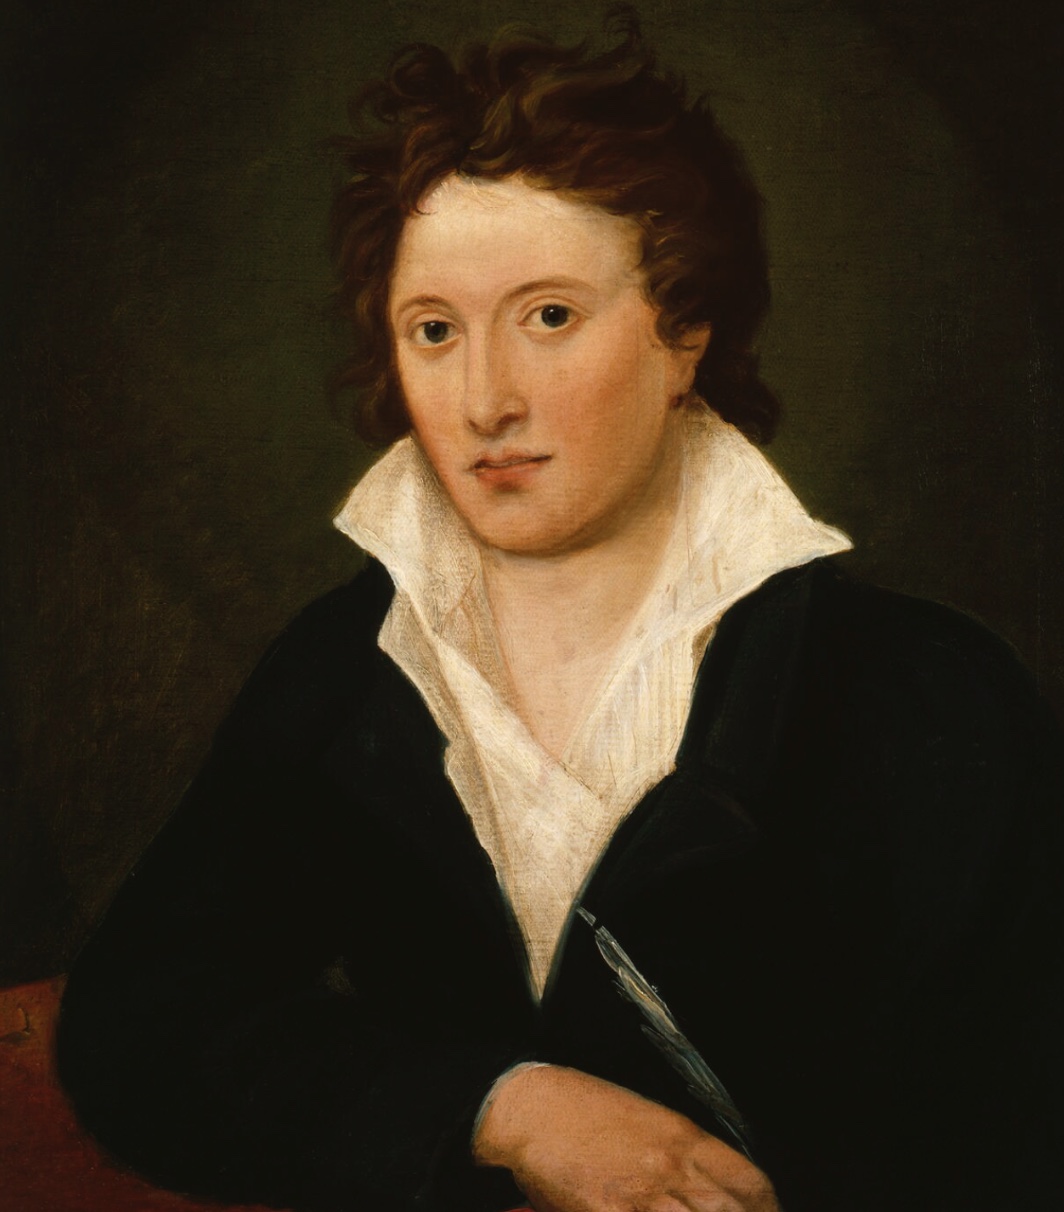 Percy Bysshe Shelley, 1819, by Amelia Curran (National Portrait Gallery, NPG
        1234). Click to enlarge.